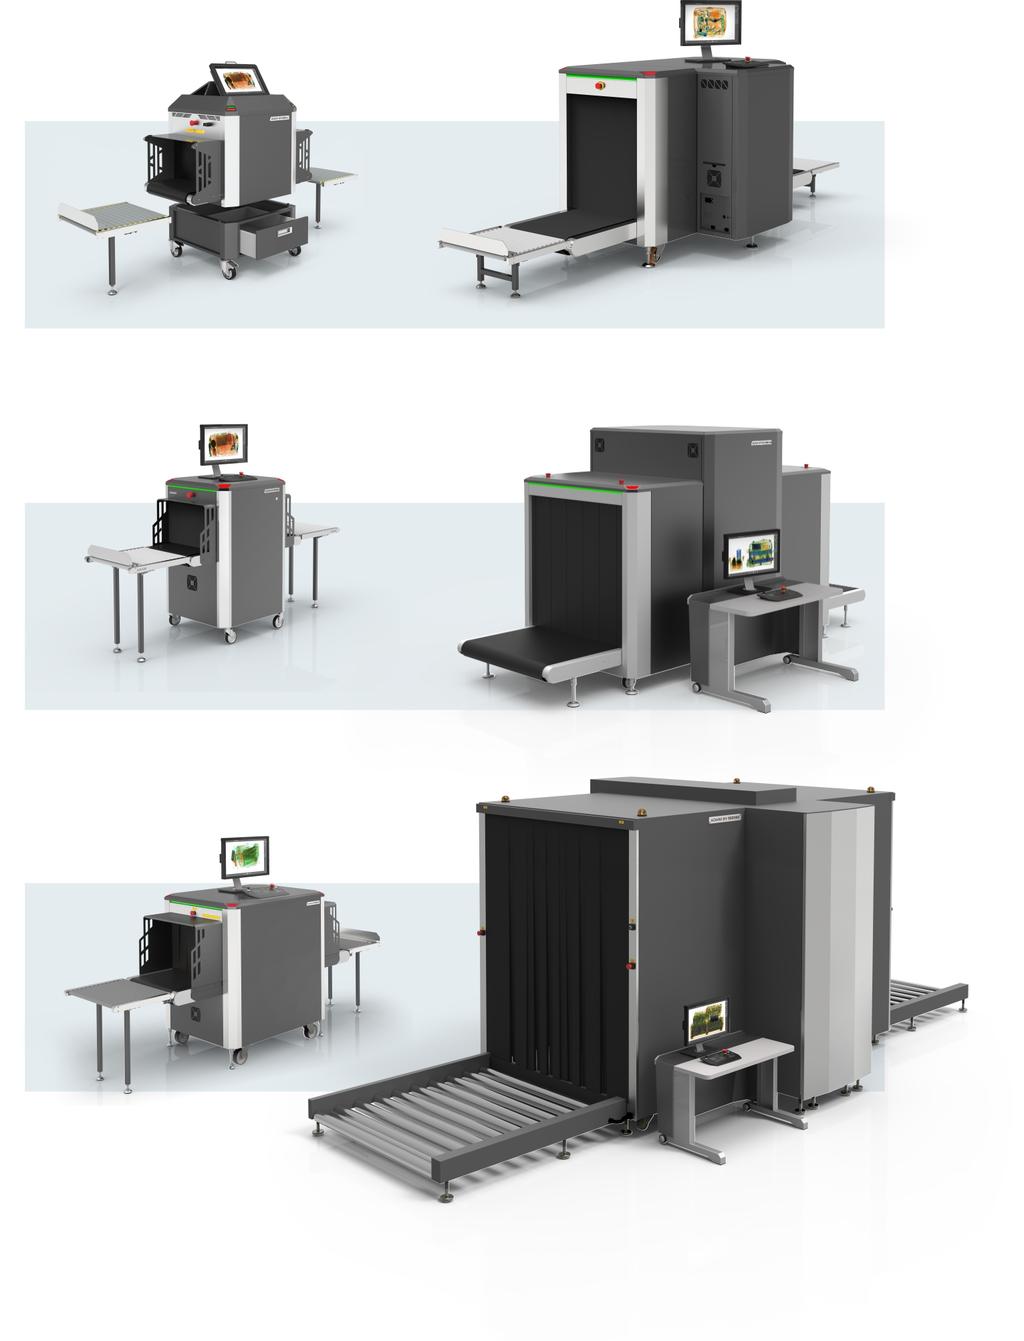 BAGGAGE INSPECTION SYSTEMS SINGLE VIEW MODELS BV 5030CA BV 6080 Touch screen Optional BV 5030 BV 100100TB BV 6045 BV 160180 Compliant with standards for cabinet X-ray systems (USFDA, Center for